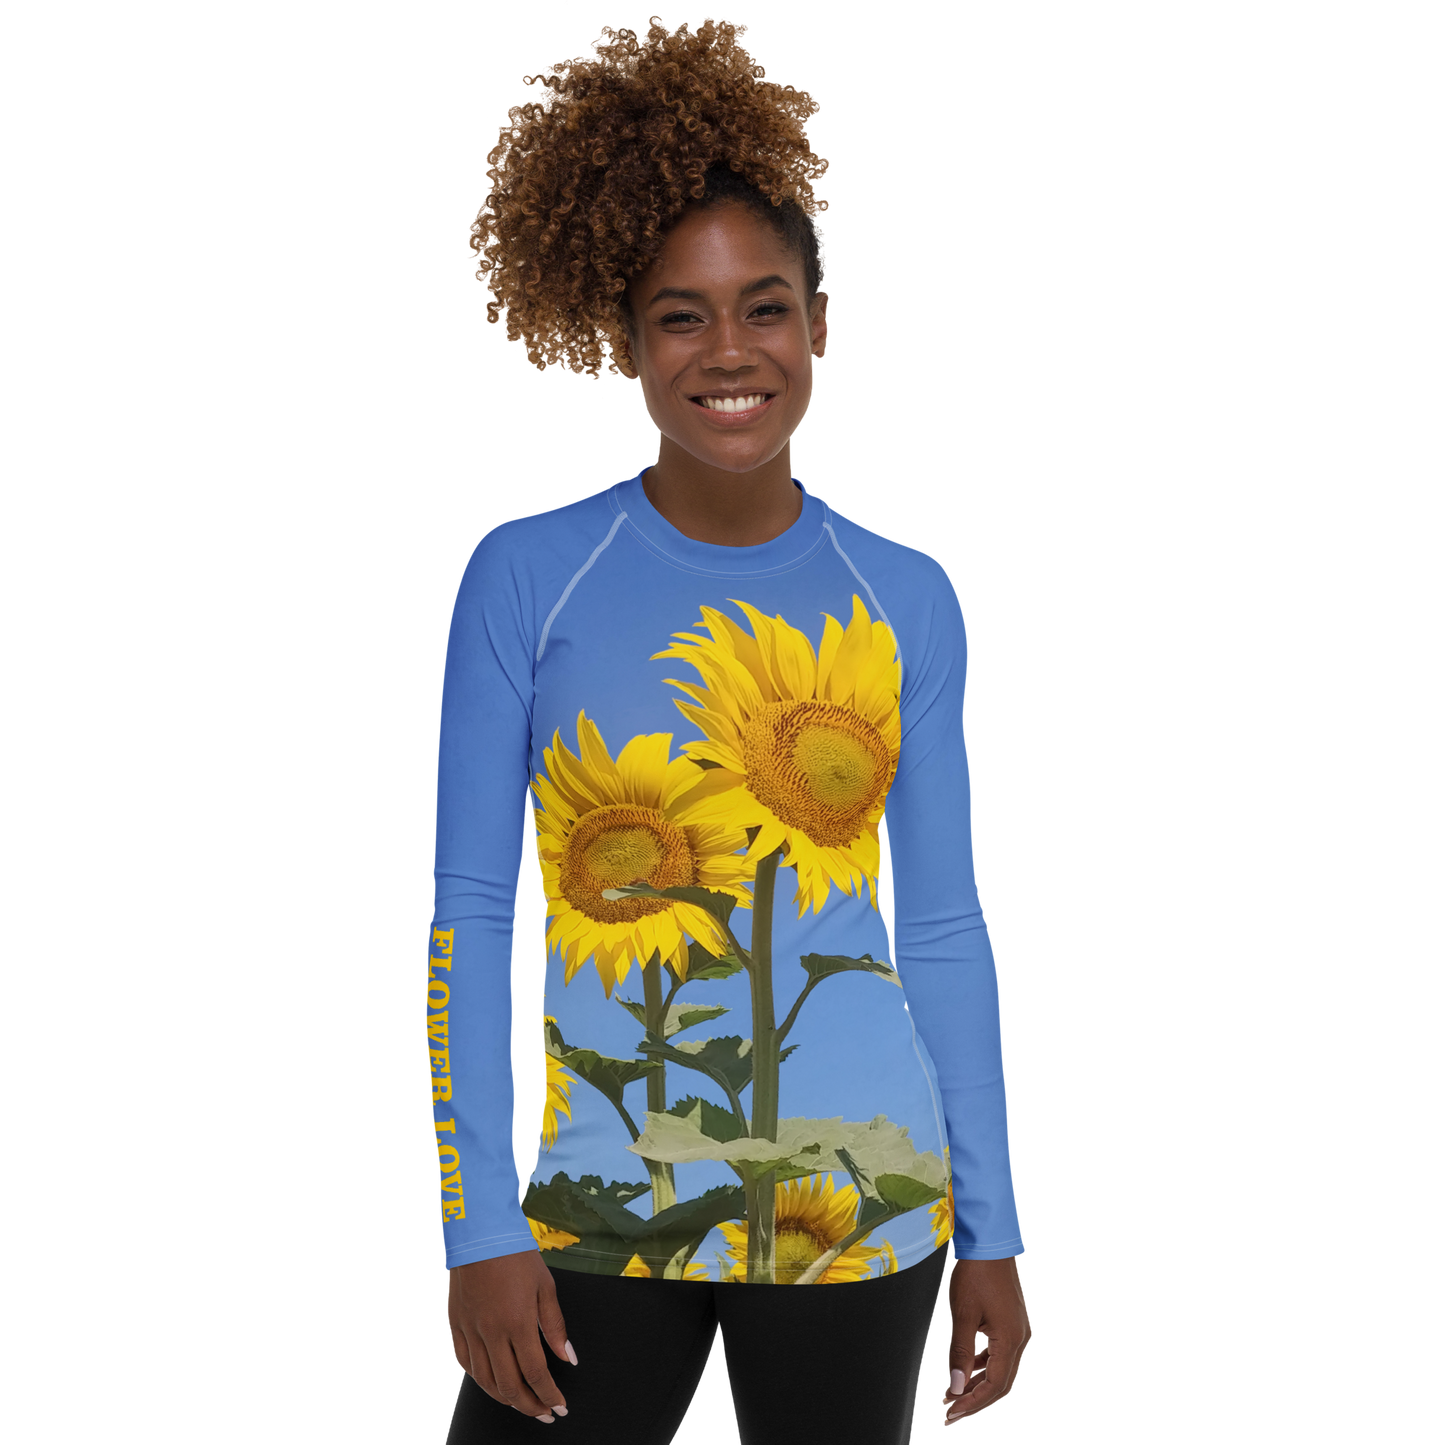 The FLOWER LOVE Collection - "Sunflower Sisters" Design Luxurious Women's Rash Guard, Sun Protective Clothing, Sports & Fitness Clothing